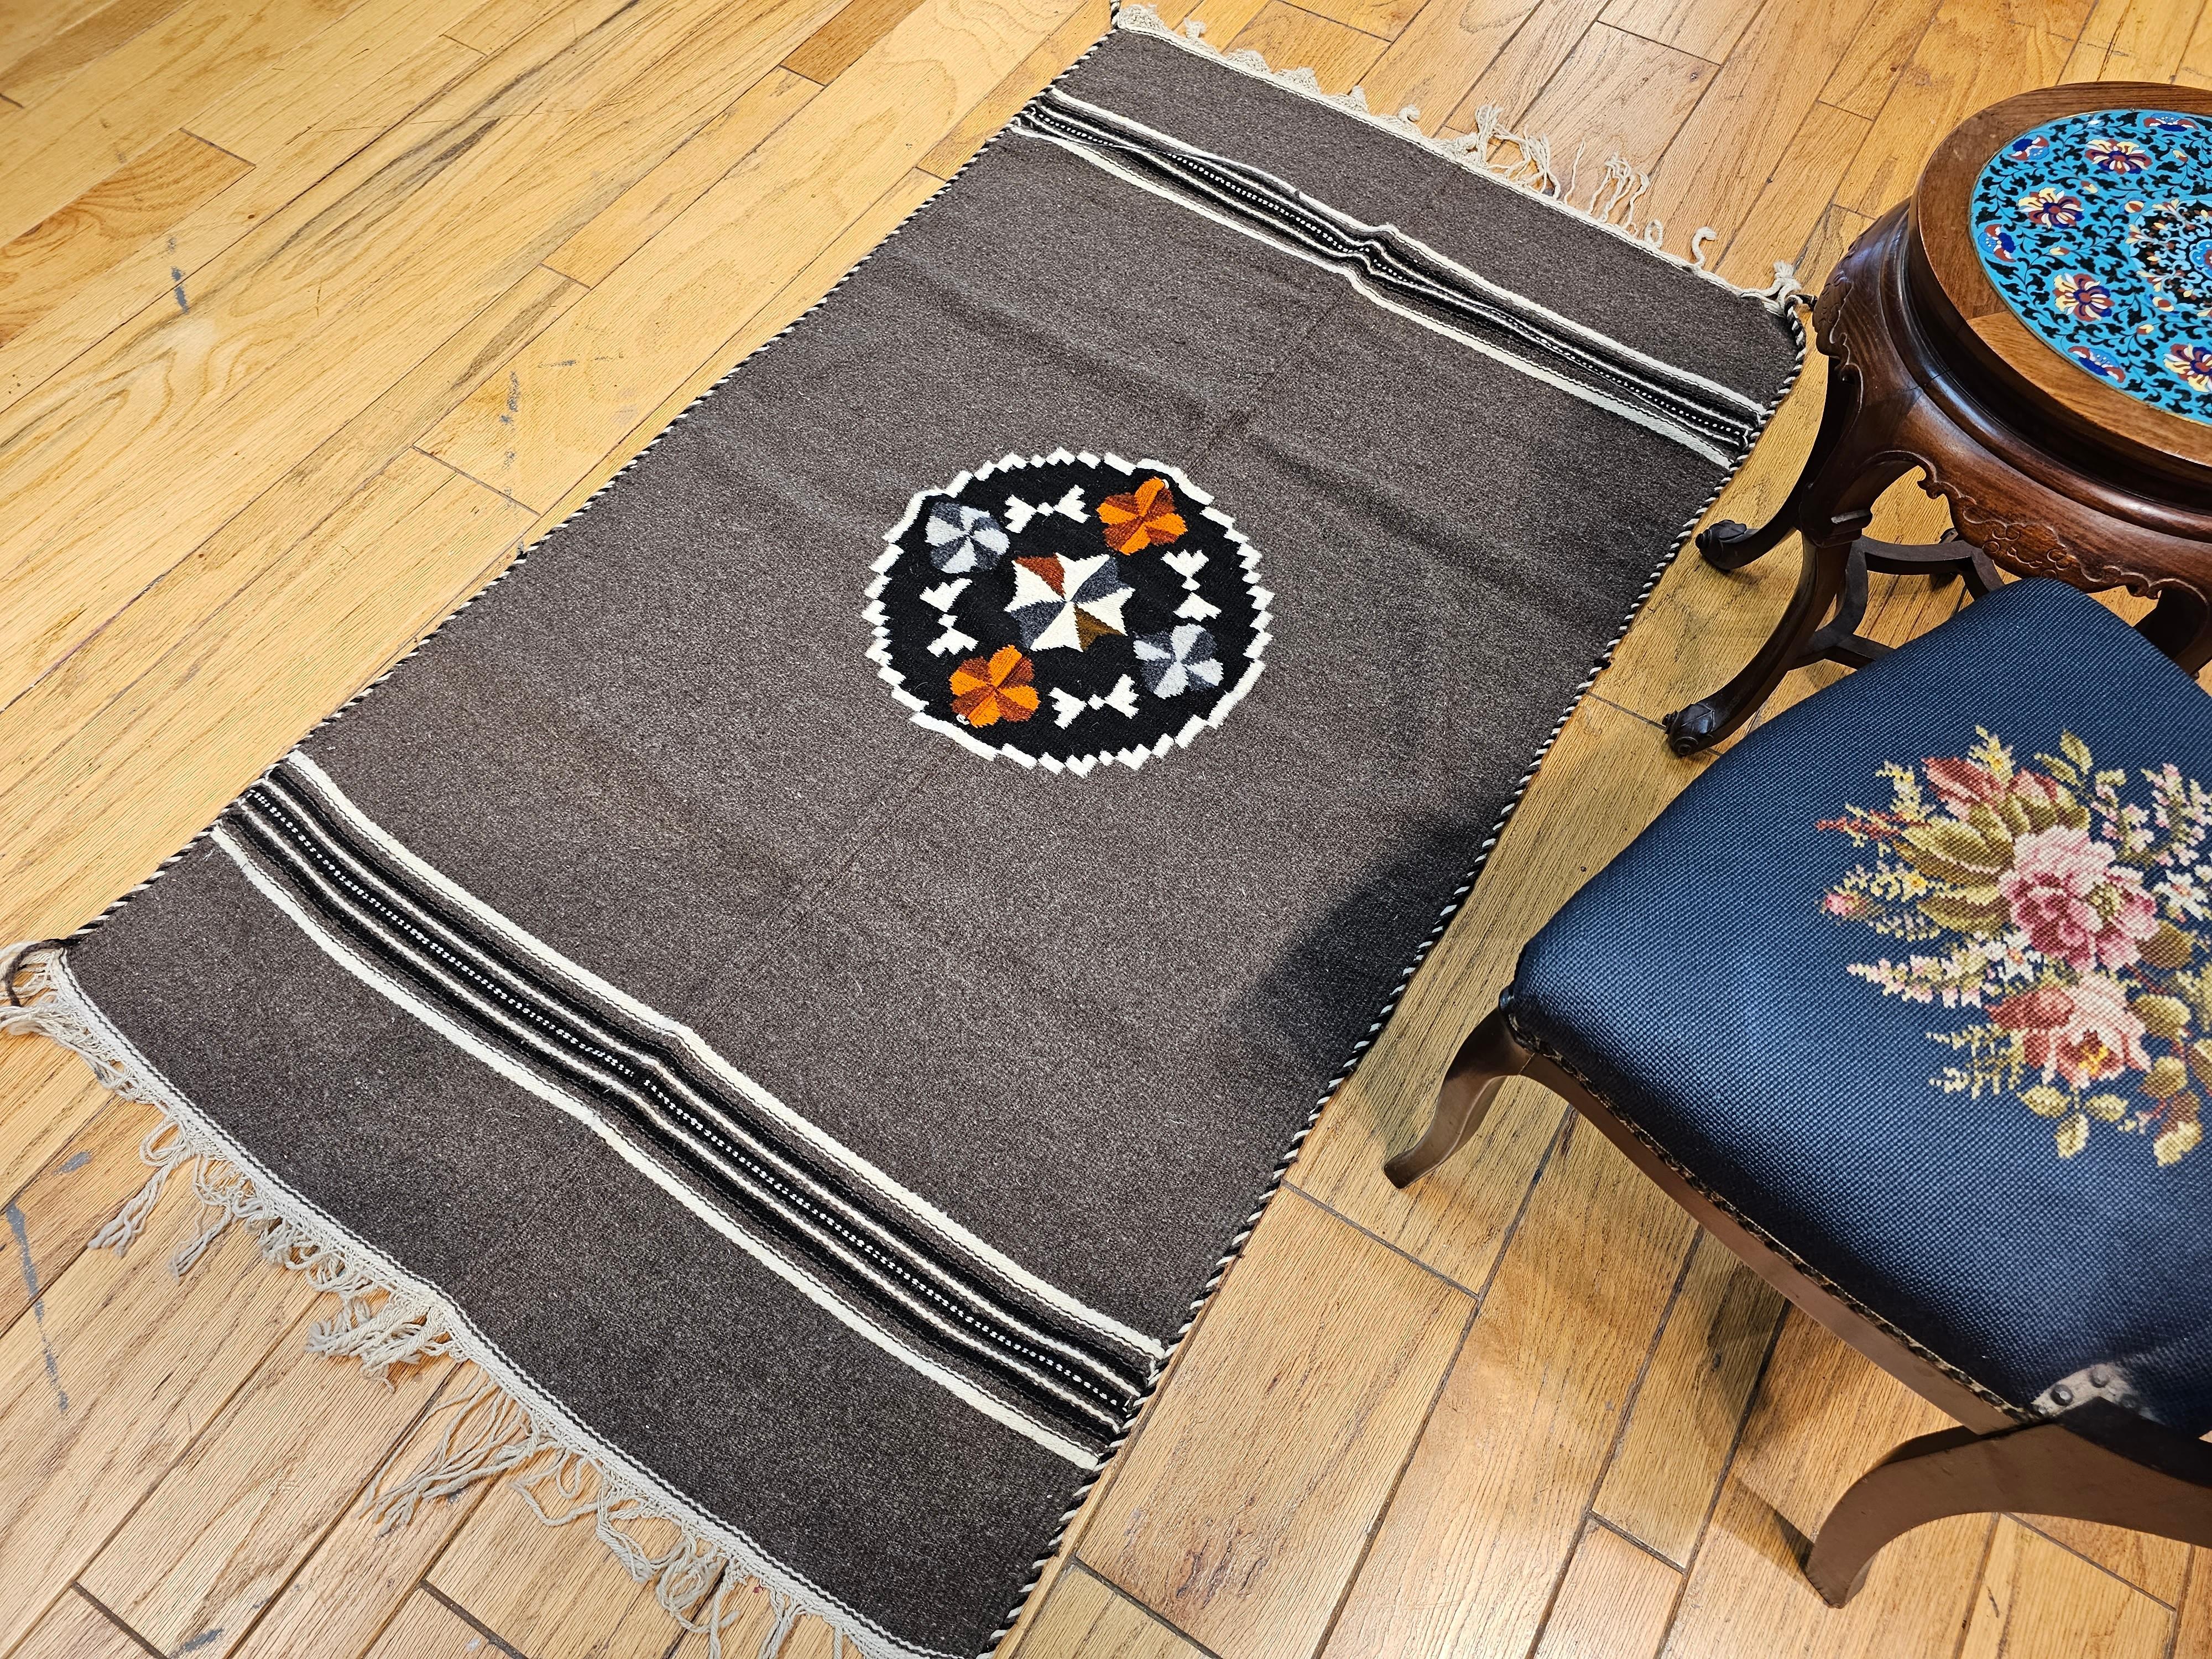 Hand-Woven Vintage Mexican Serape Kilim Rug in Dark Gray/Chocolate Colors For Sale